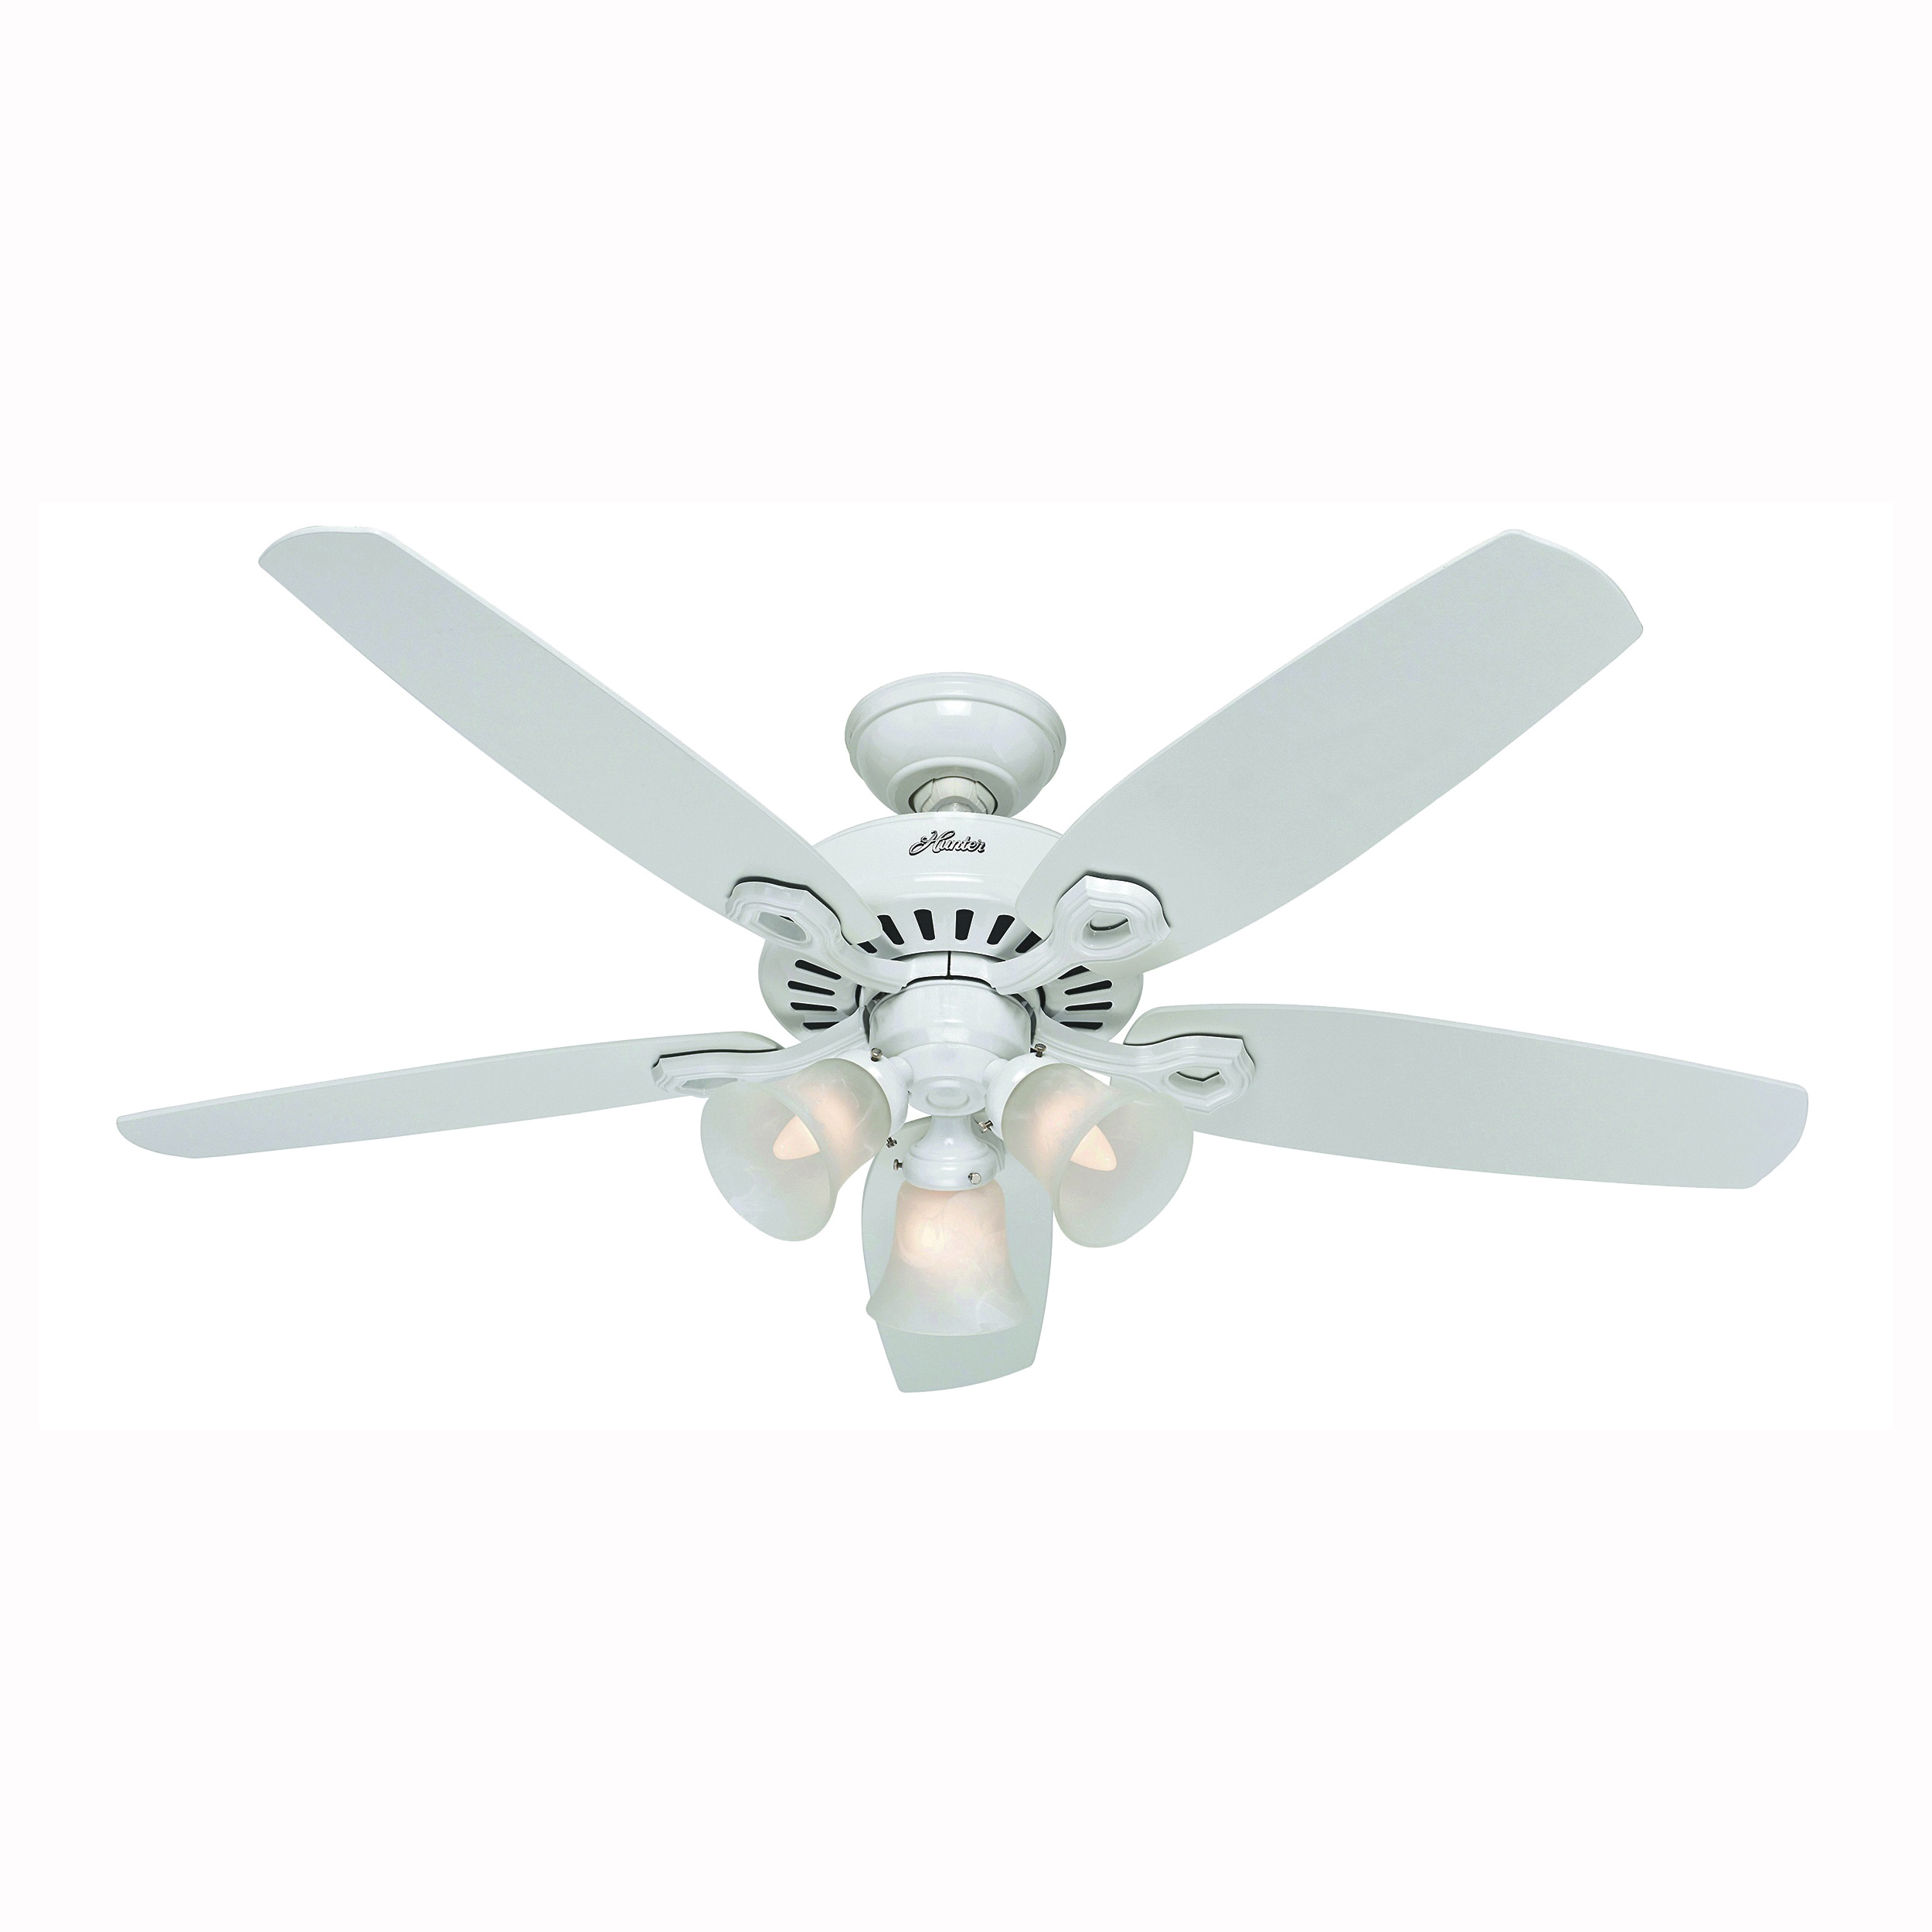 53236 Ceiling Fan, 5-Blade, Snow White Blade, 52 in Sweep, 3-Speed, With Lights: Yes